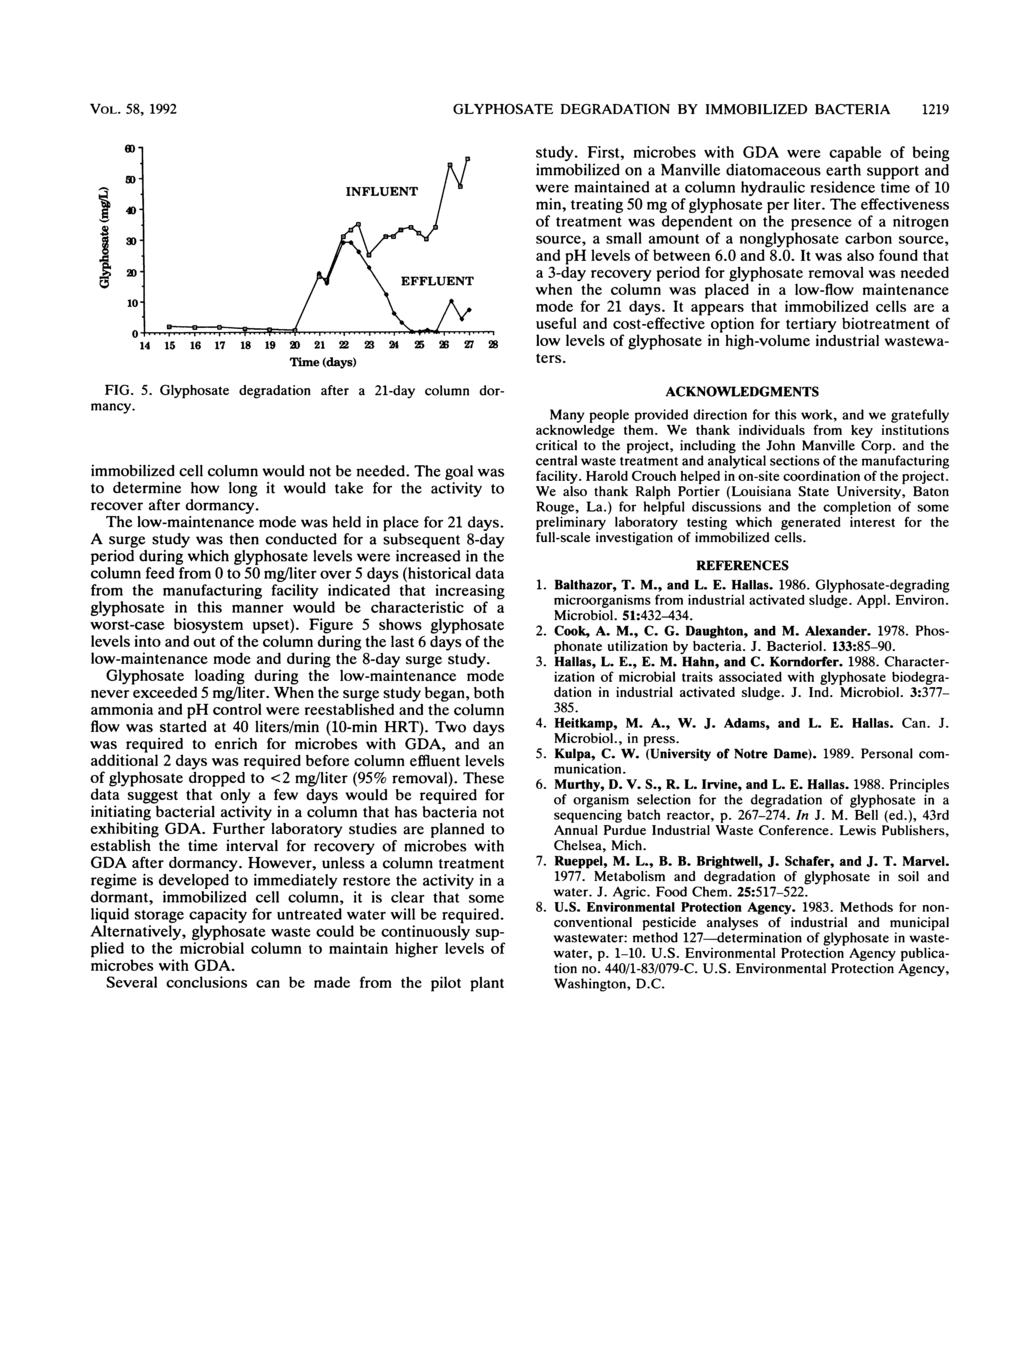 VOL. 58, 1992 GLYPHOSATE DEGRADATION BY IMMOBILIZED BACTERIA 1219 I- D- 30- INFLUENT 14 15 16 17 18 19 X) 21 22 23 2 25 26 27 28 Time (days) FIG. 5. Glyphosate degradation after a 21-day column dormancy.